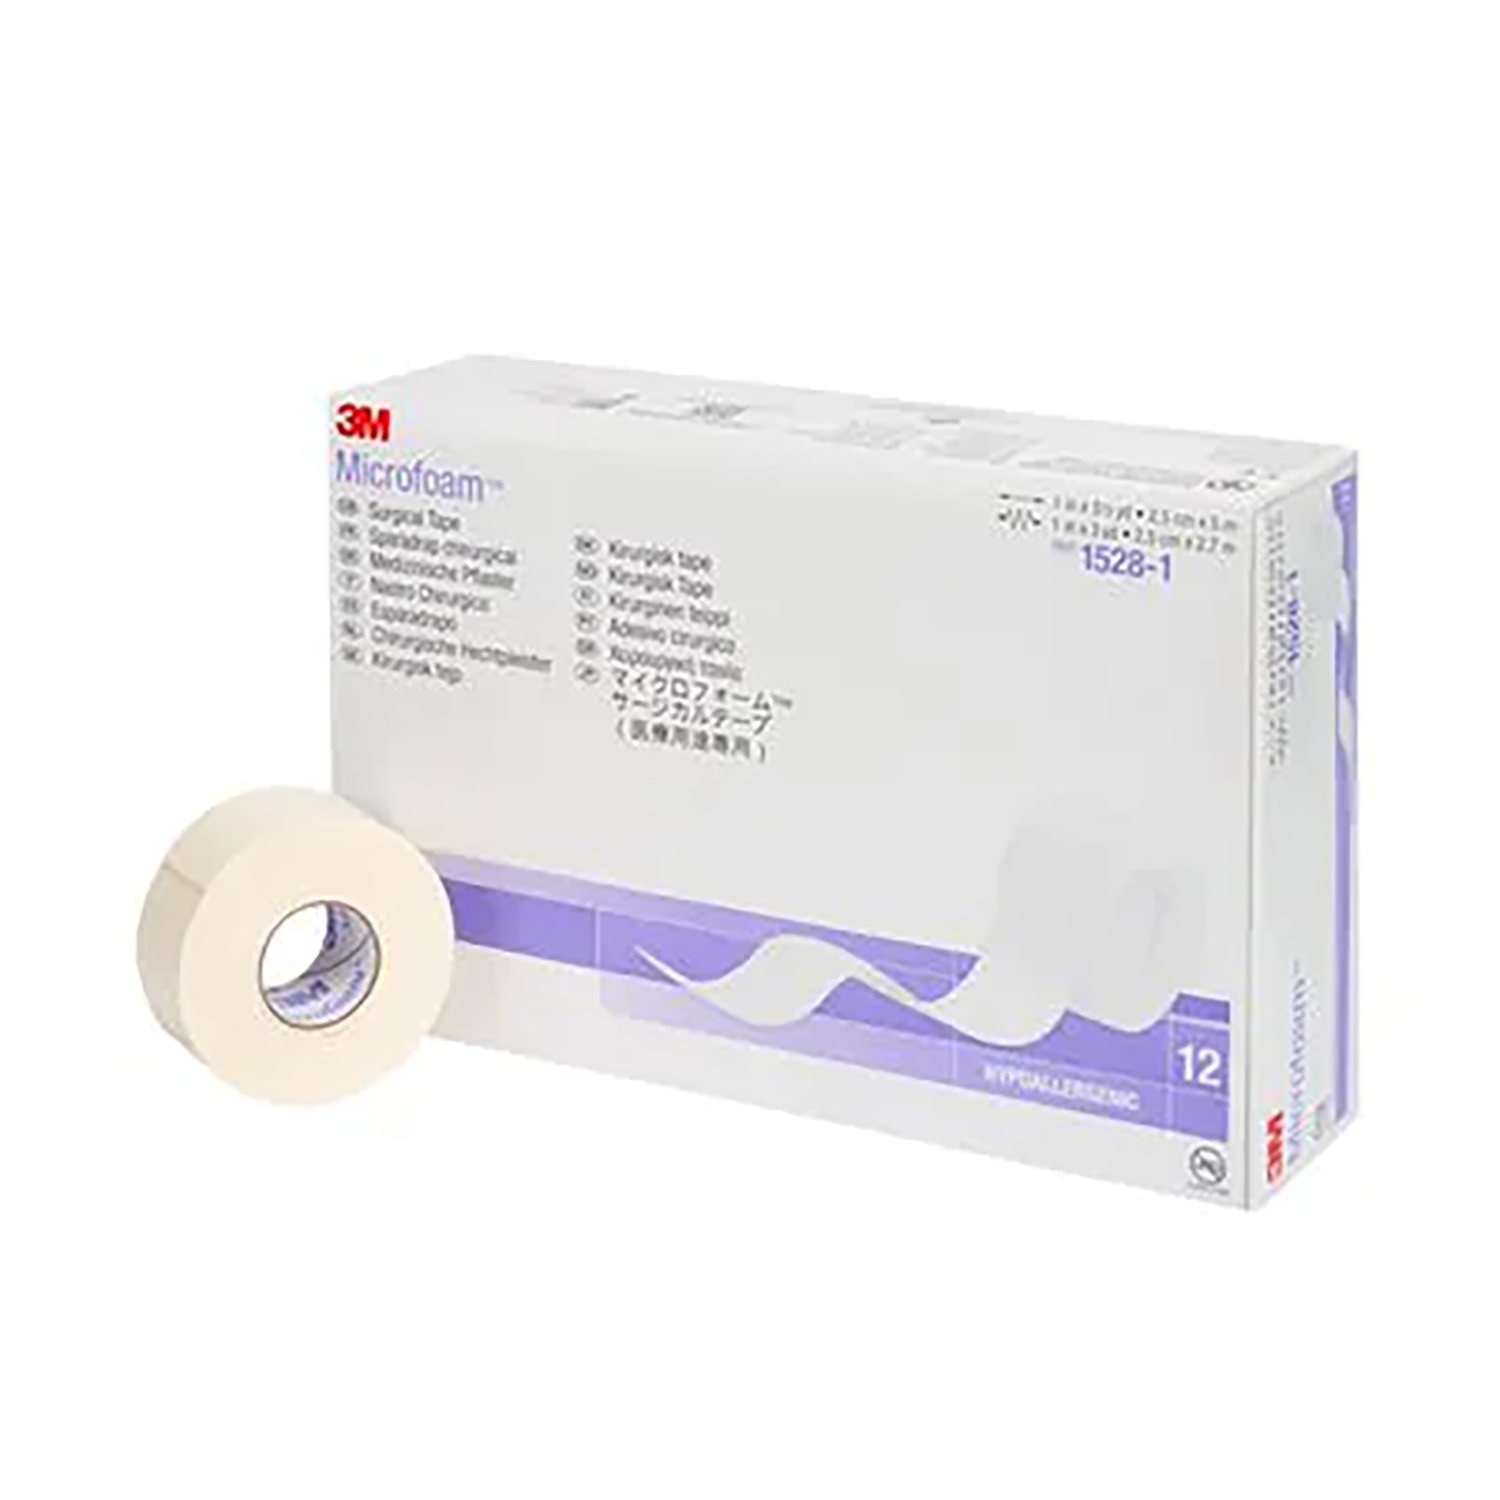 3M Microfoam Surgical Tape | 2.5cm x 5m | Pack of 12